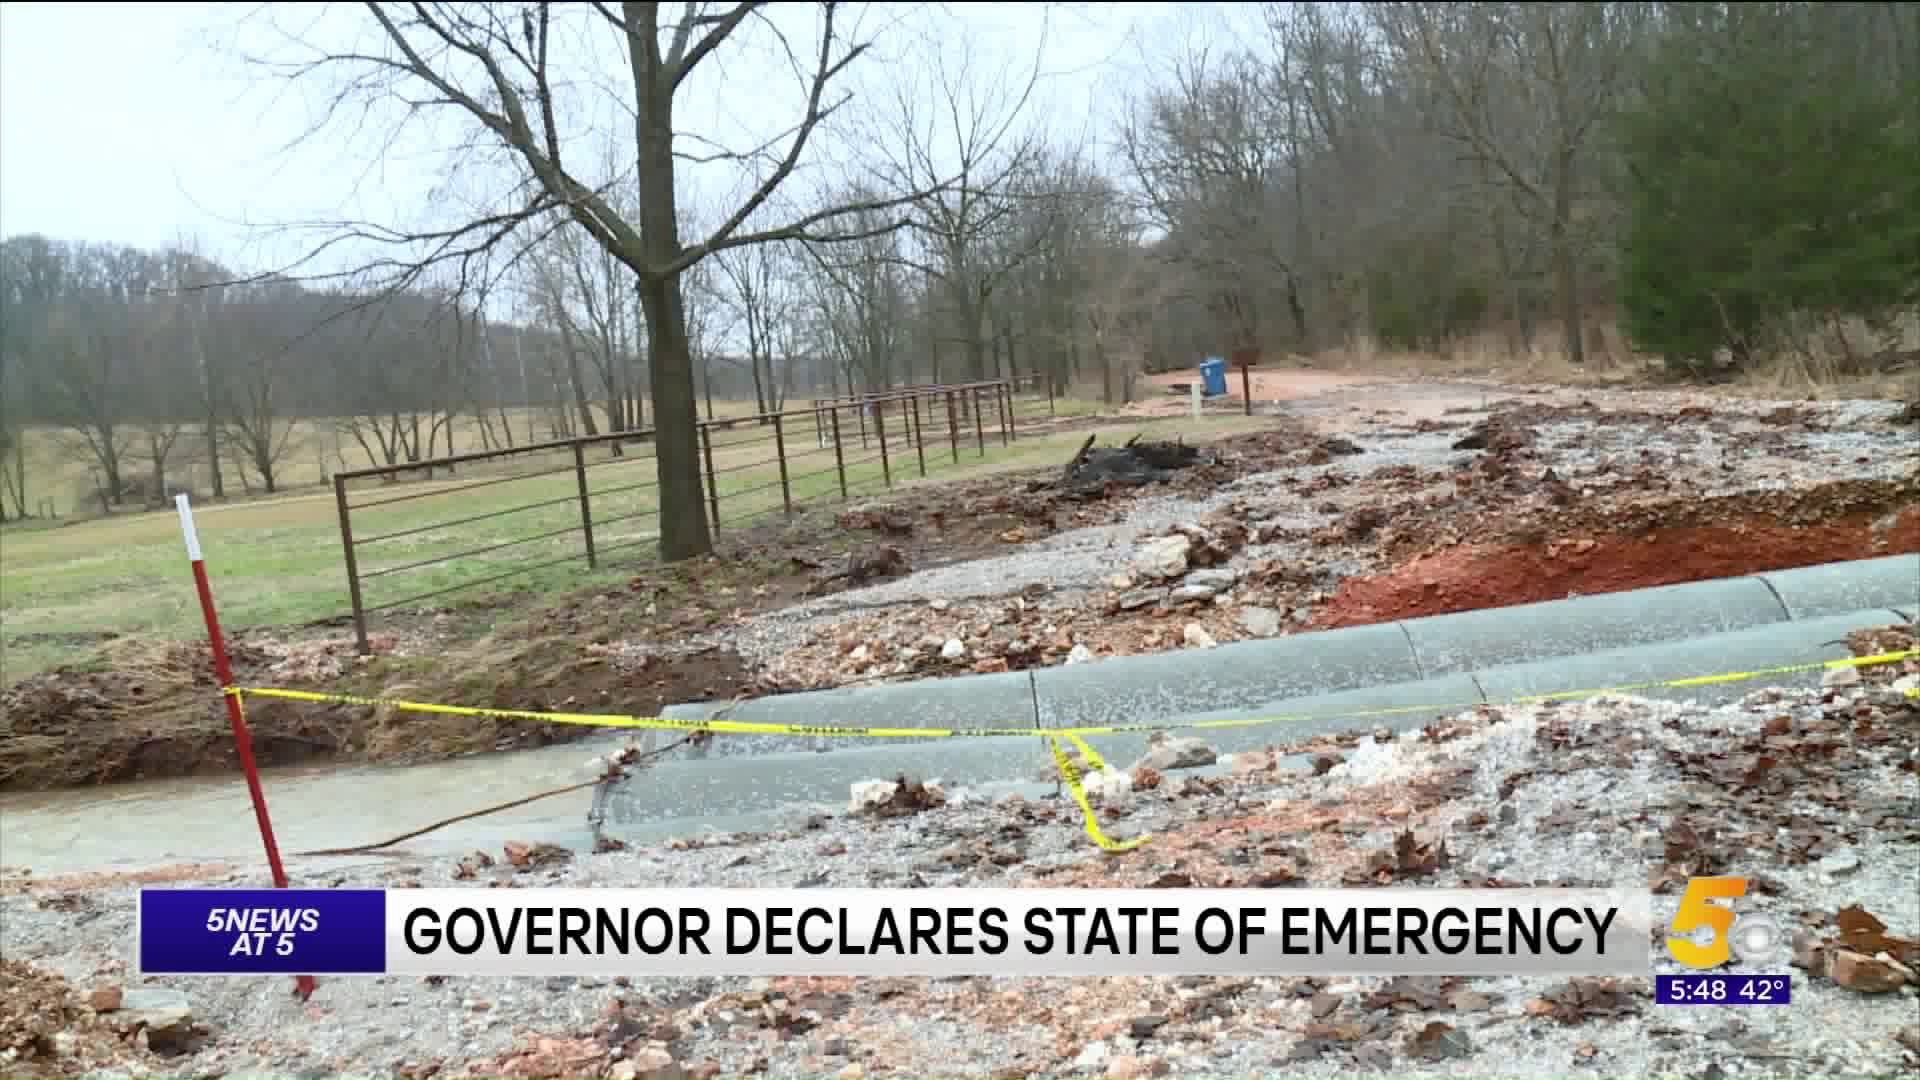 Governor Declares State of Emergency In Arkansas Following Severe Weather